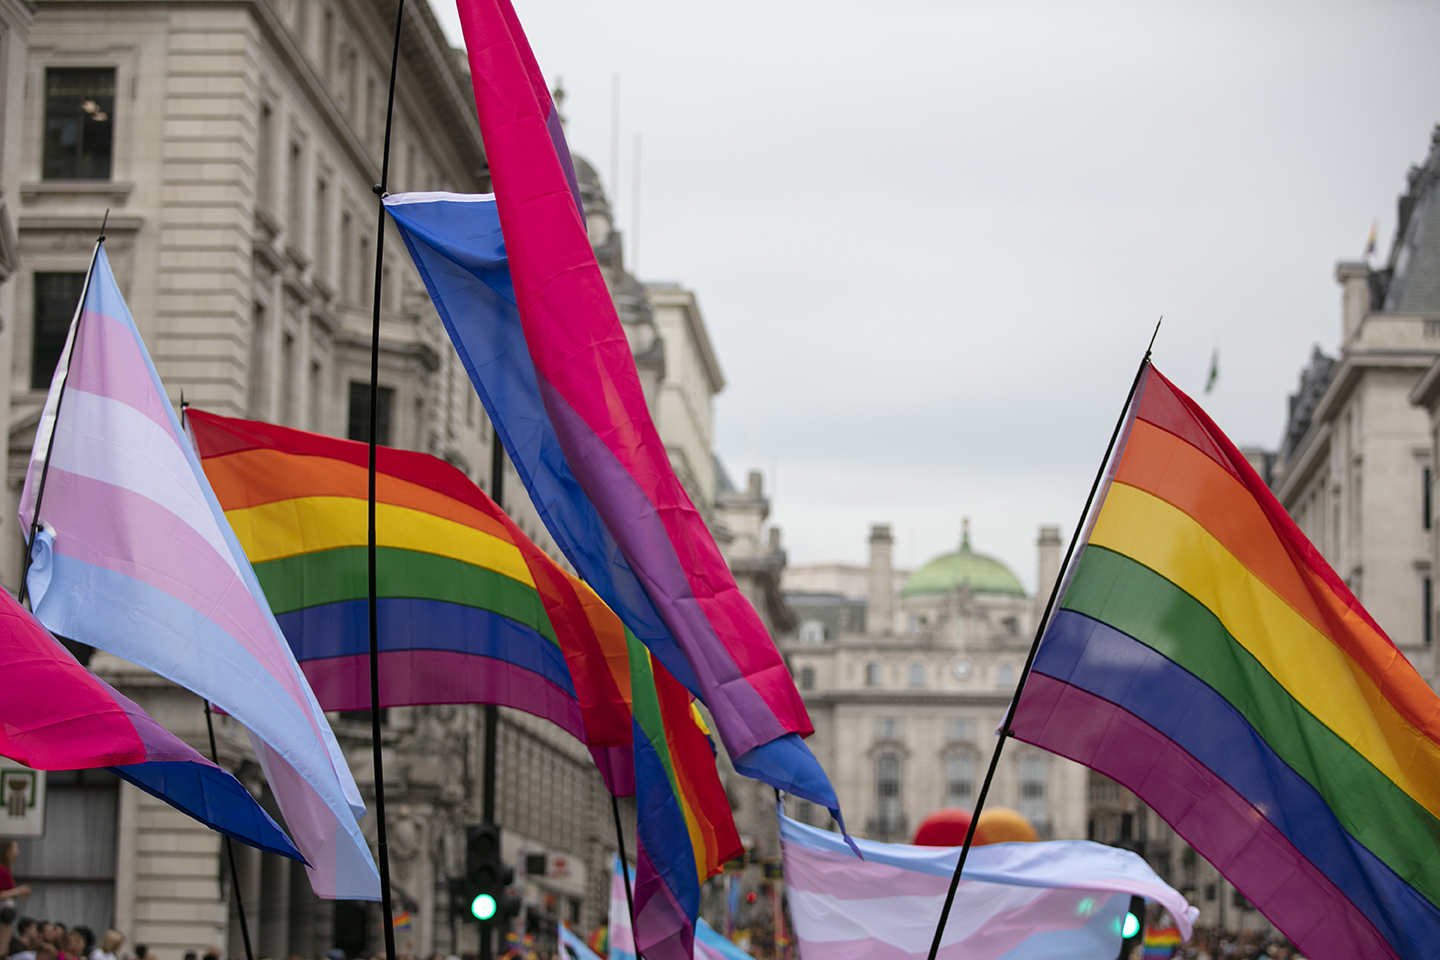 People wave LGBTQ gay pride rainbow flags at a pride event